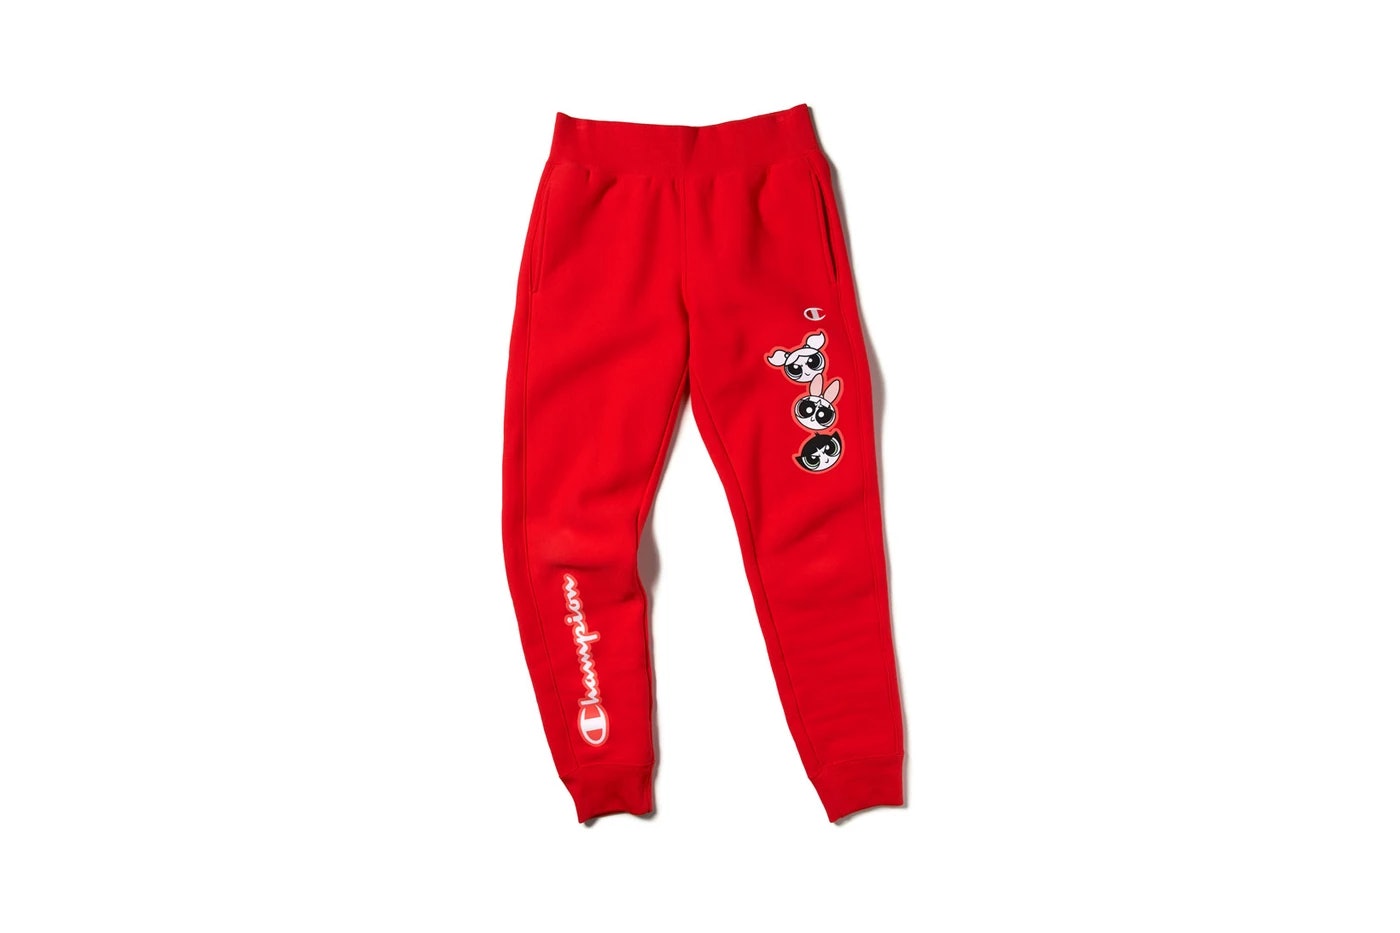 red champion hoodie and sweatpants